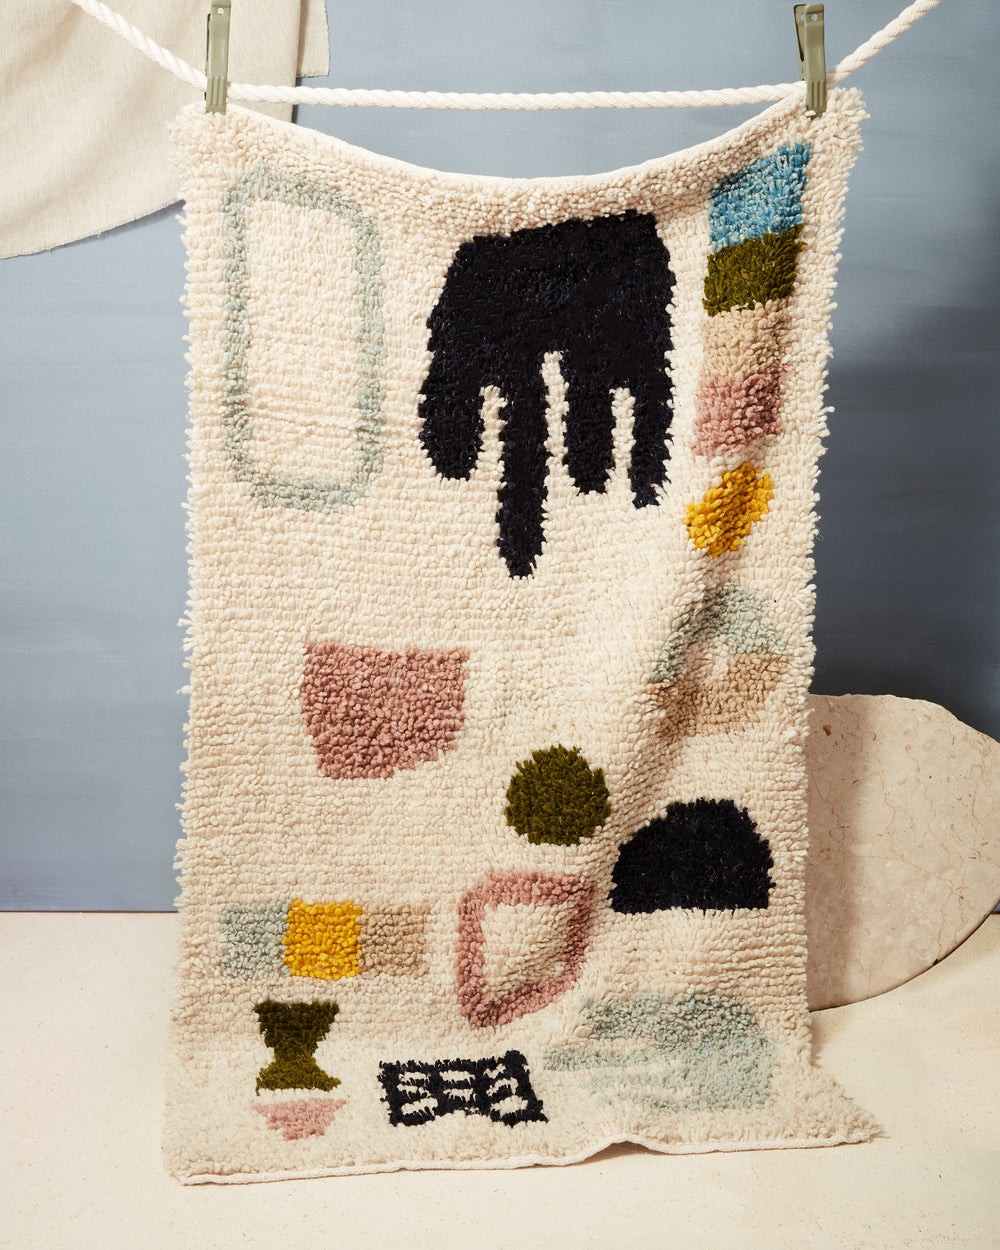 Rug up against the cold in style with our top picks of the coolest